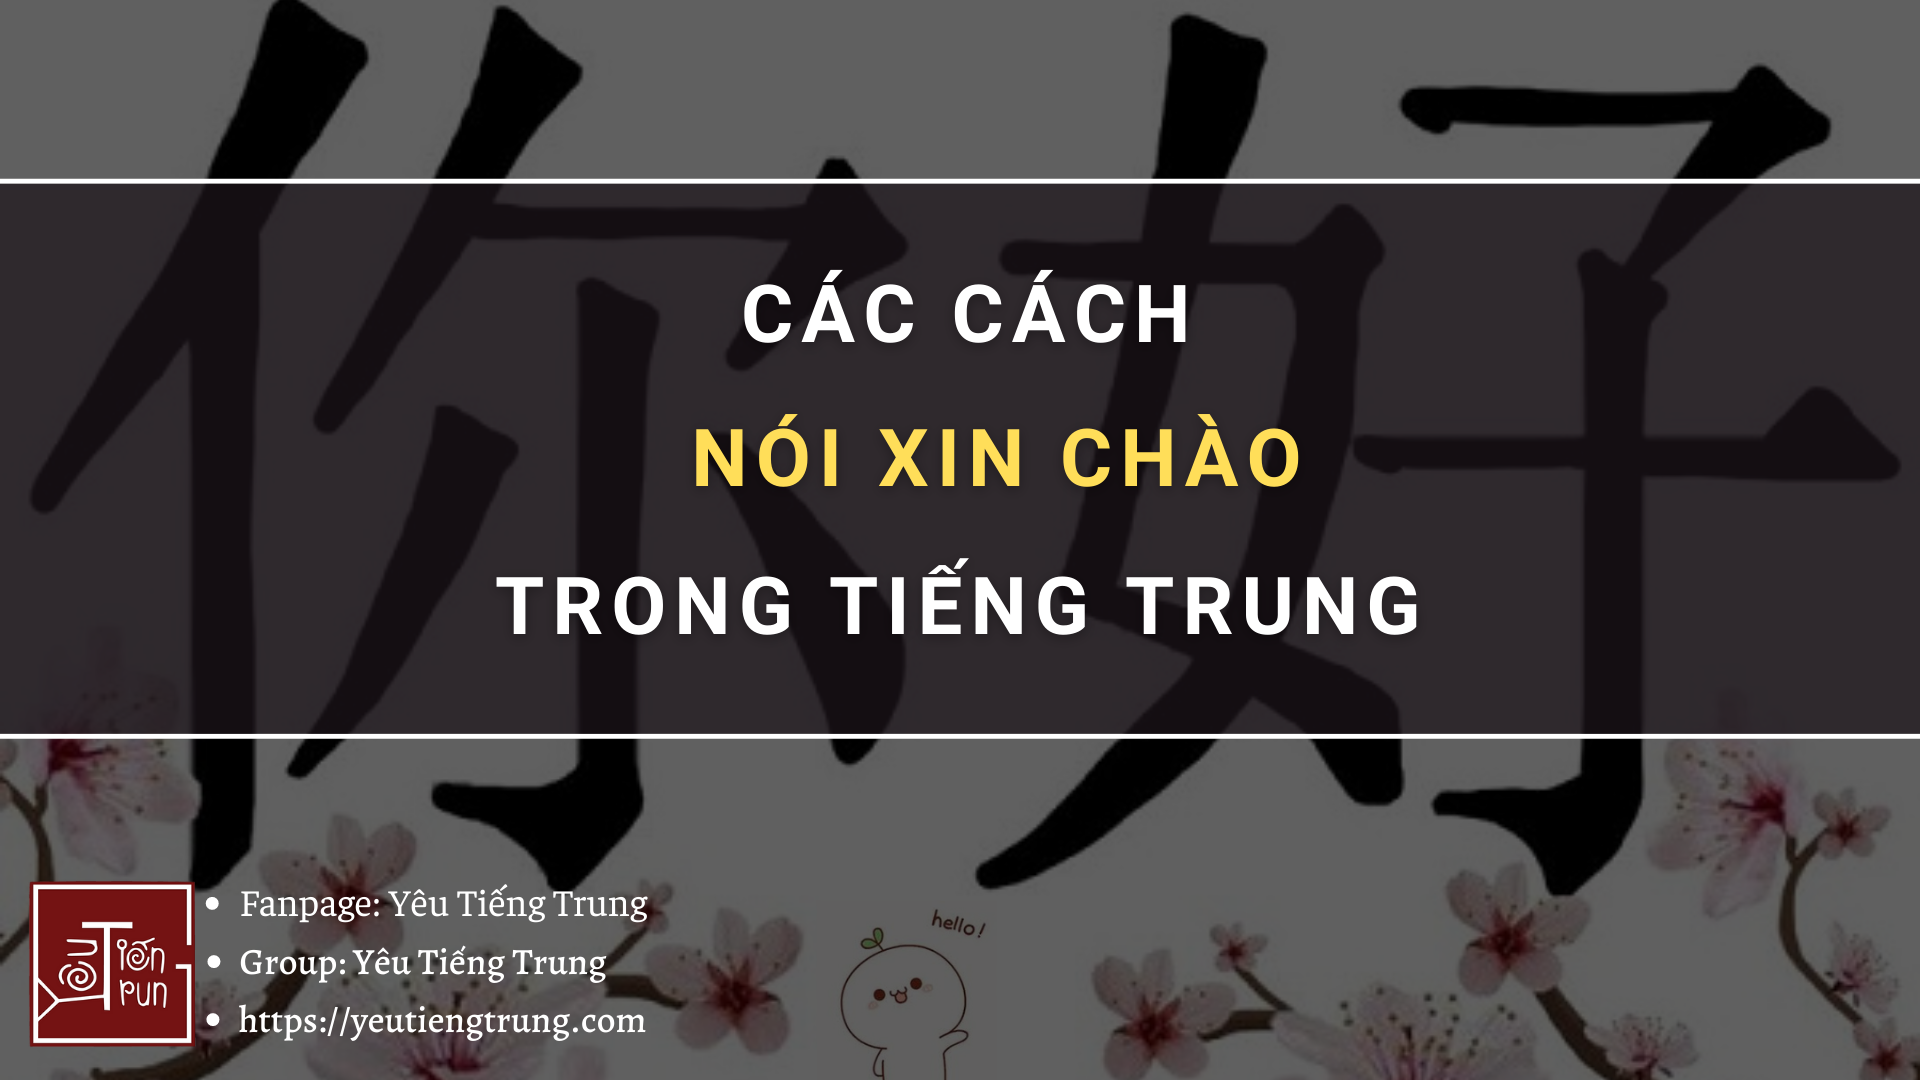 cac-cach-noi-xin-chao-trong-tieng-trung